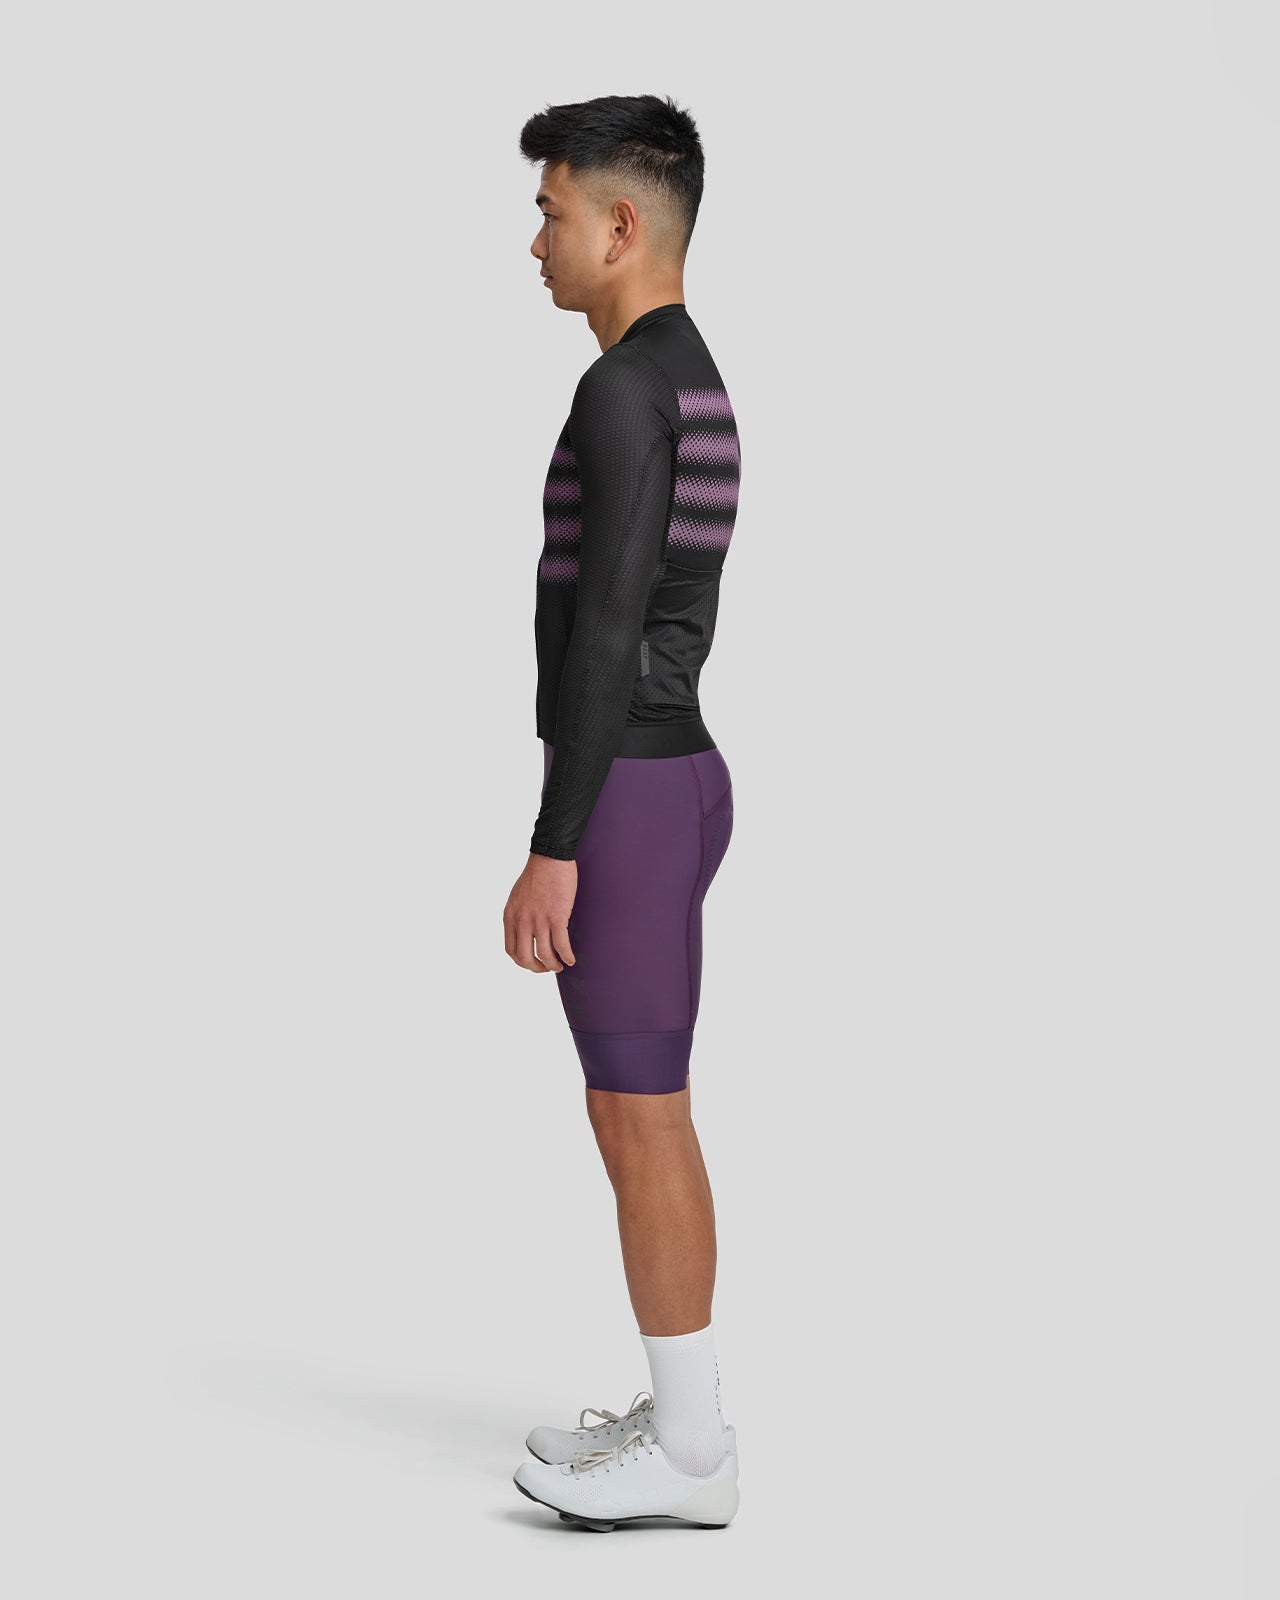 Blurred Out Ultralight Pro LS Jersey